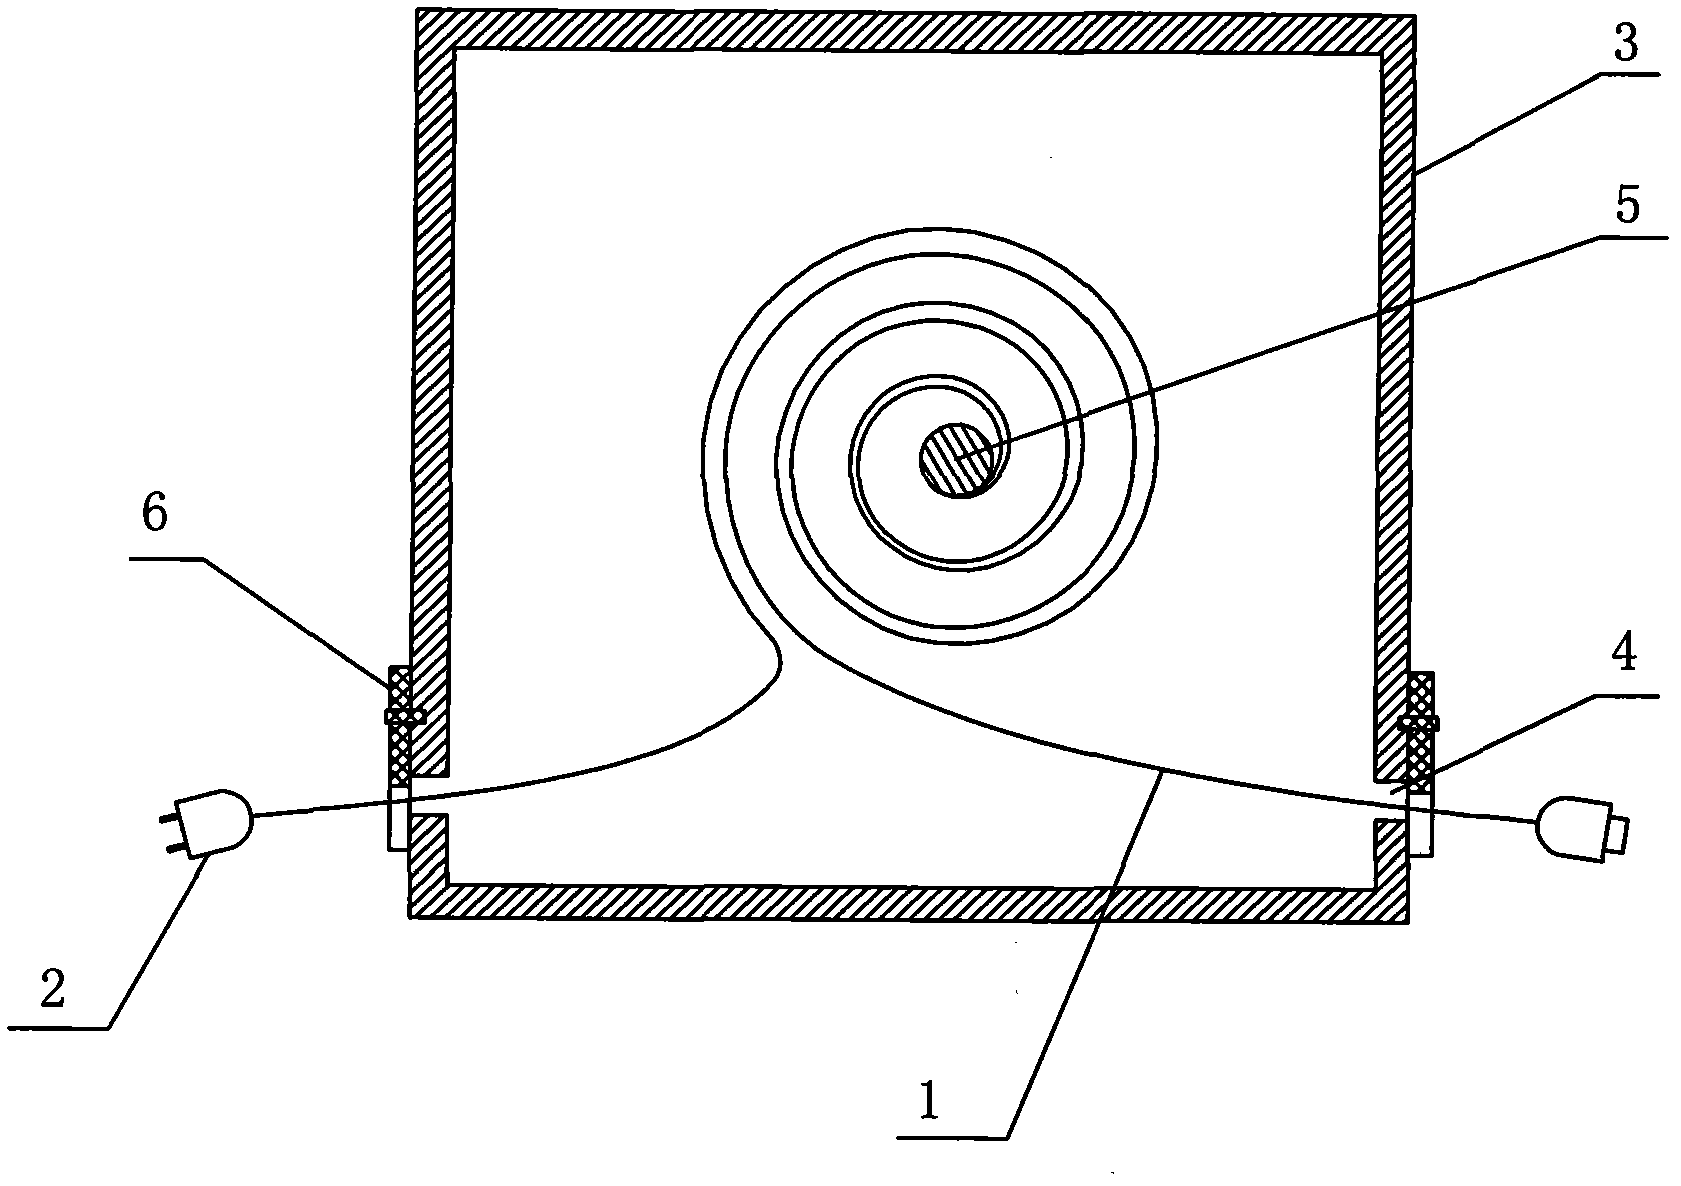 Electrical appliance wire with wire arrangement box